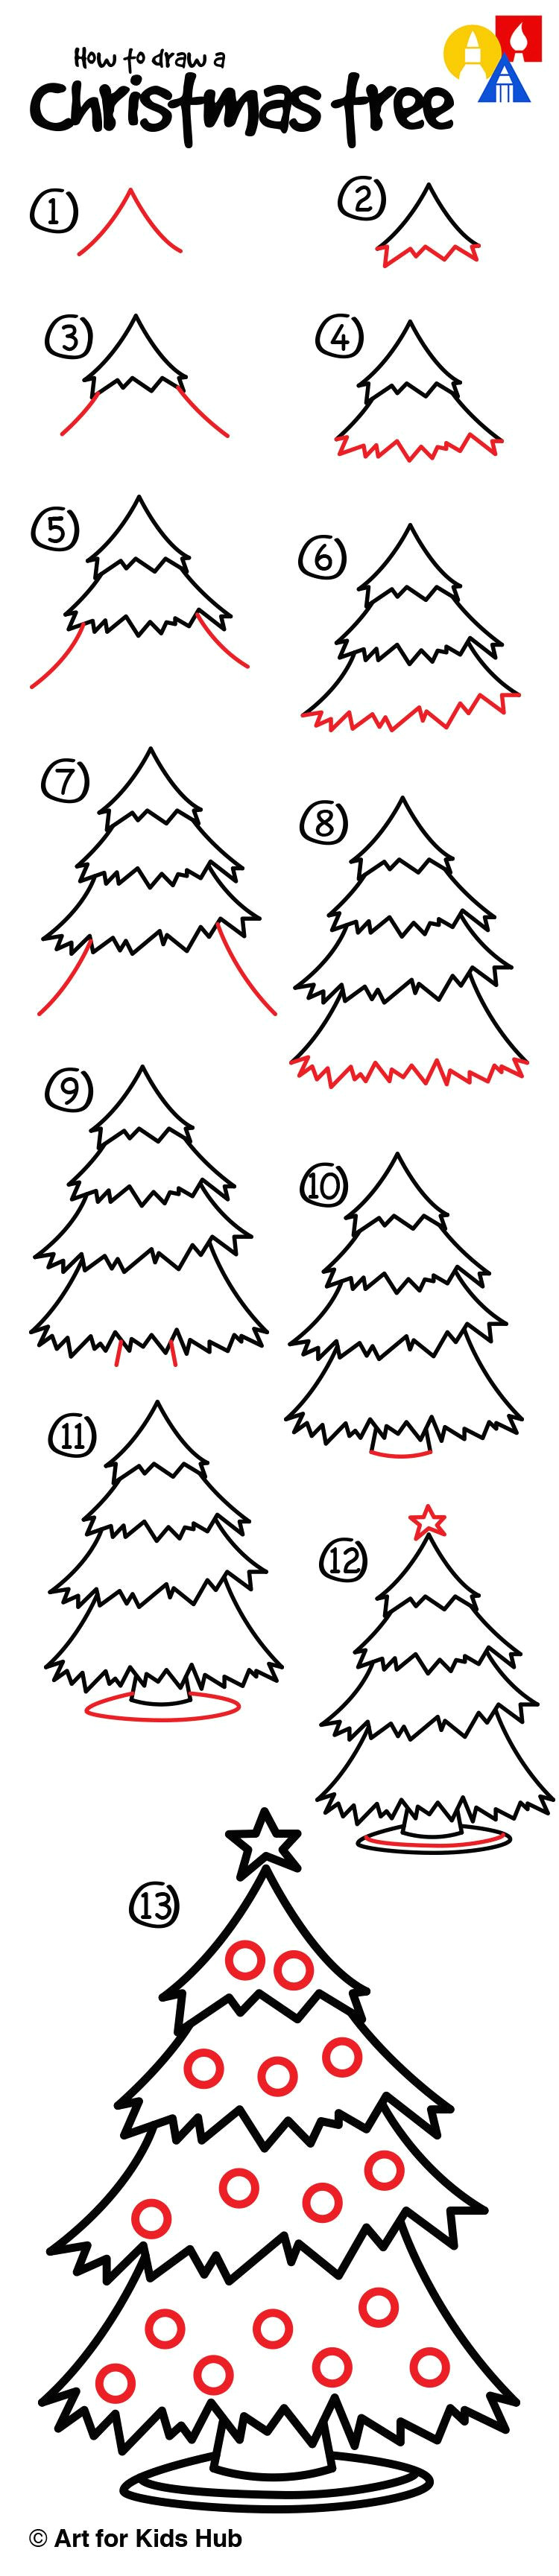 Drawing Xmas Pictures How to Draw A Christmas Tree Art for Kids Hub Christmas Winter